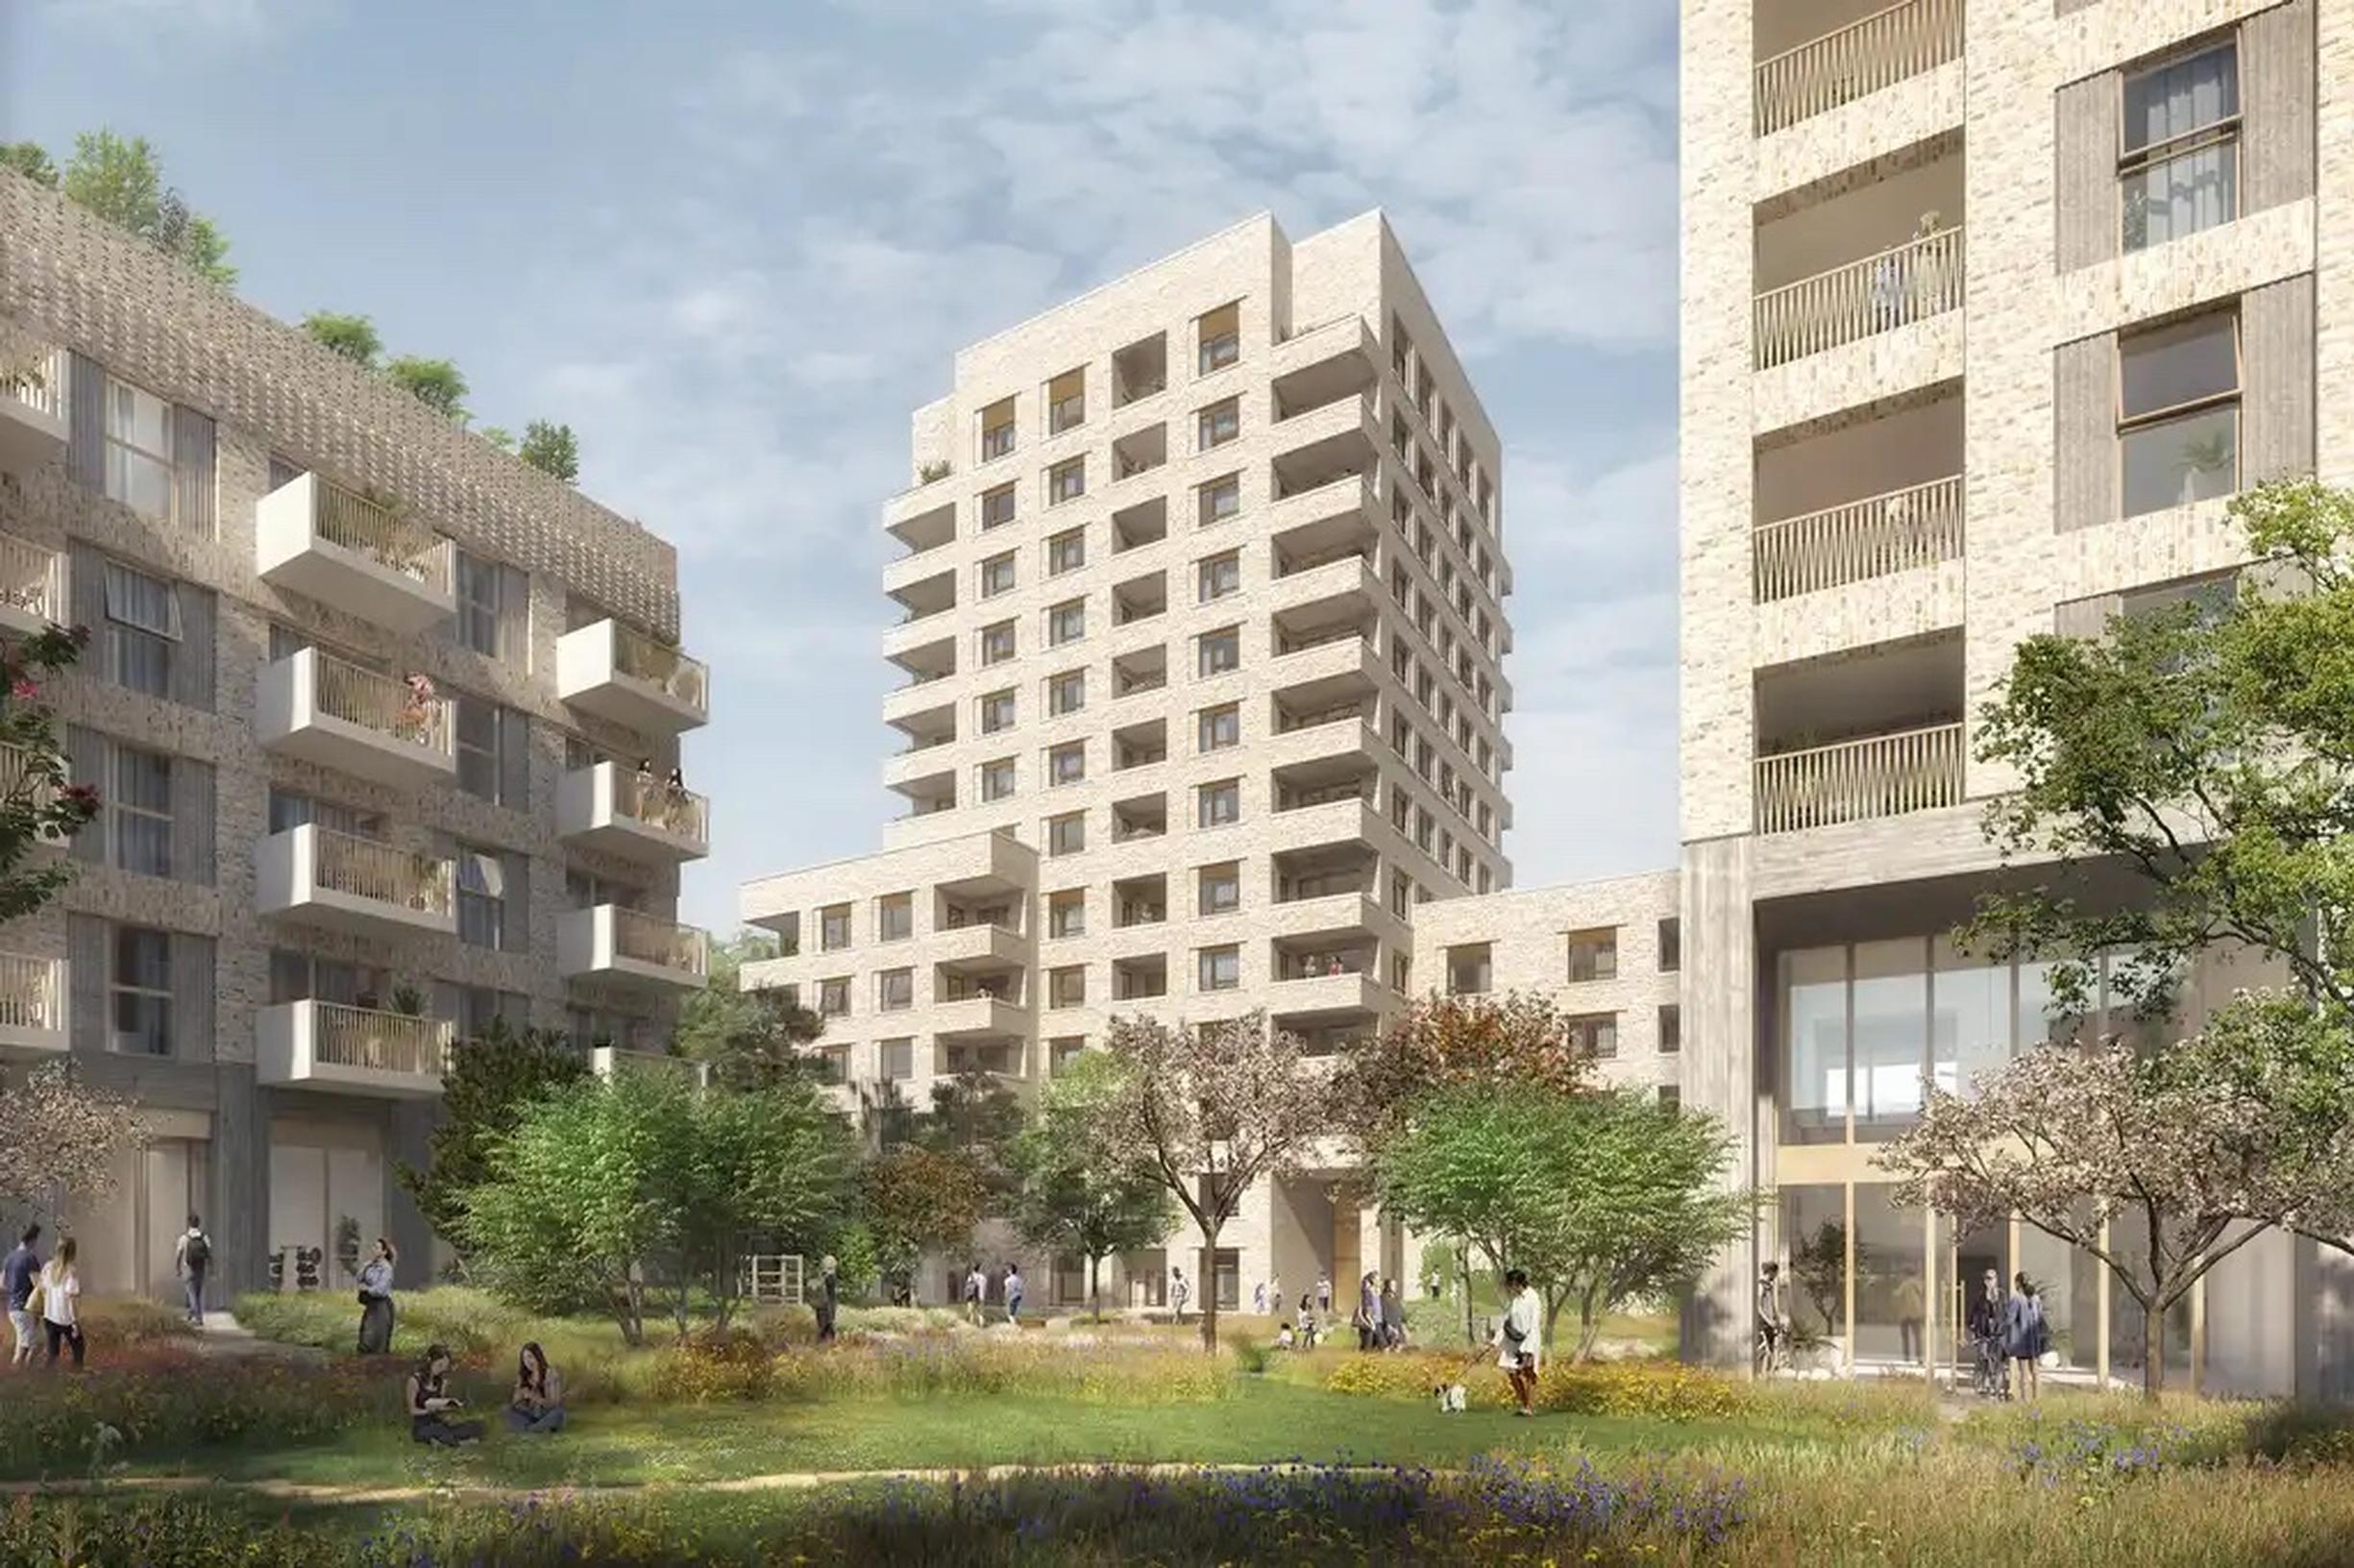 CGI rendering of the Cockfoster`s redevelopment